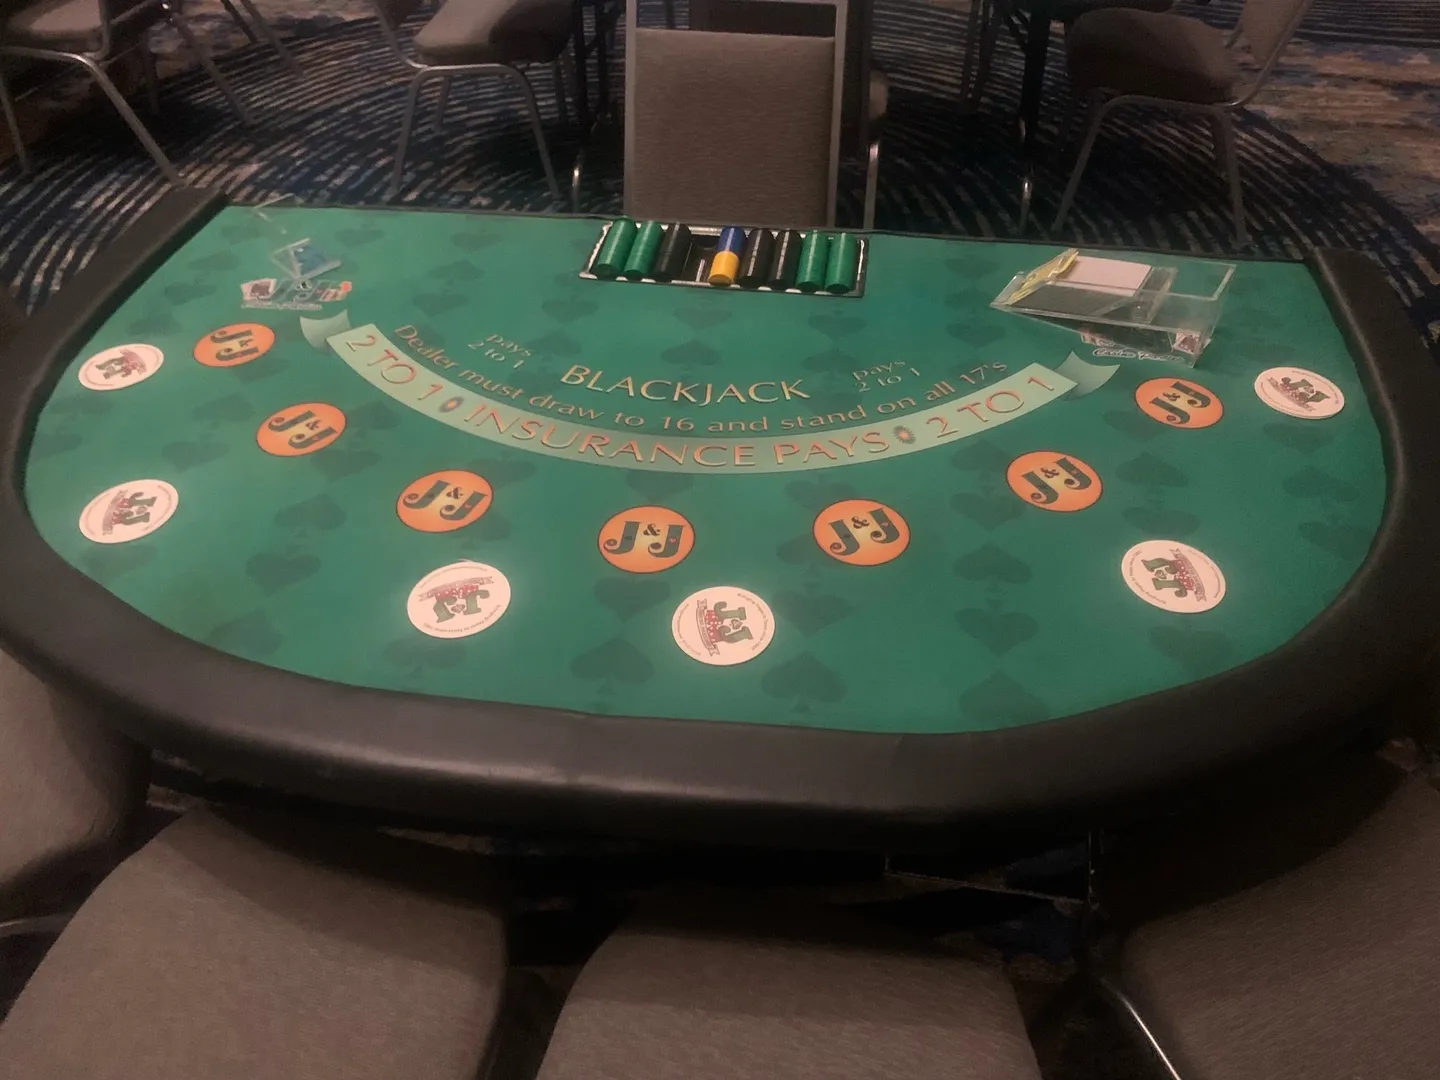 A table with a green cover and orange numbers